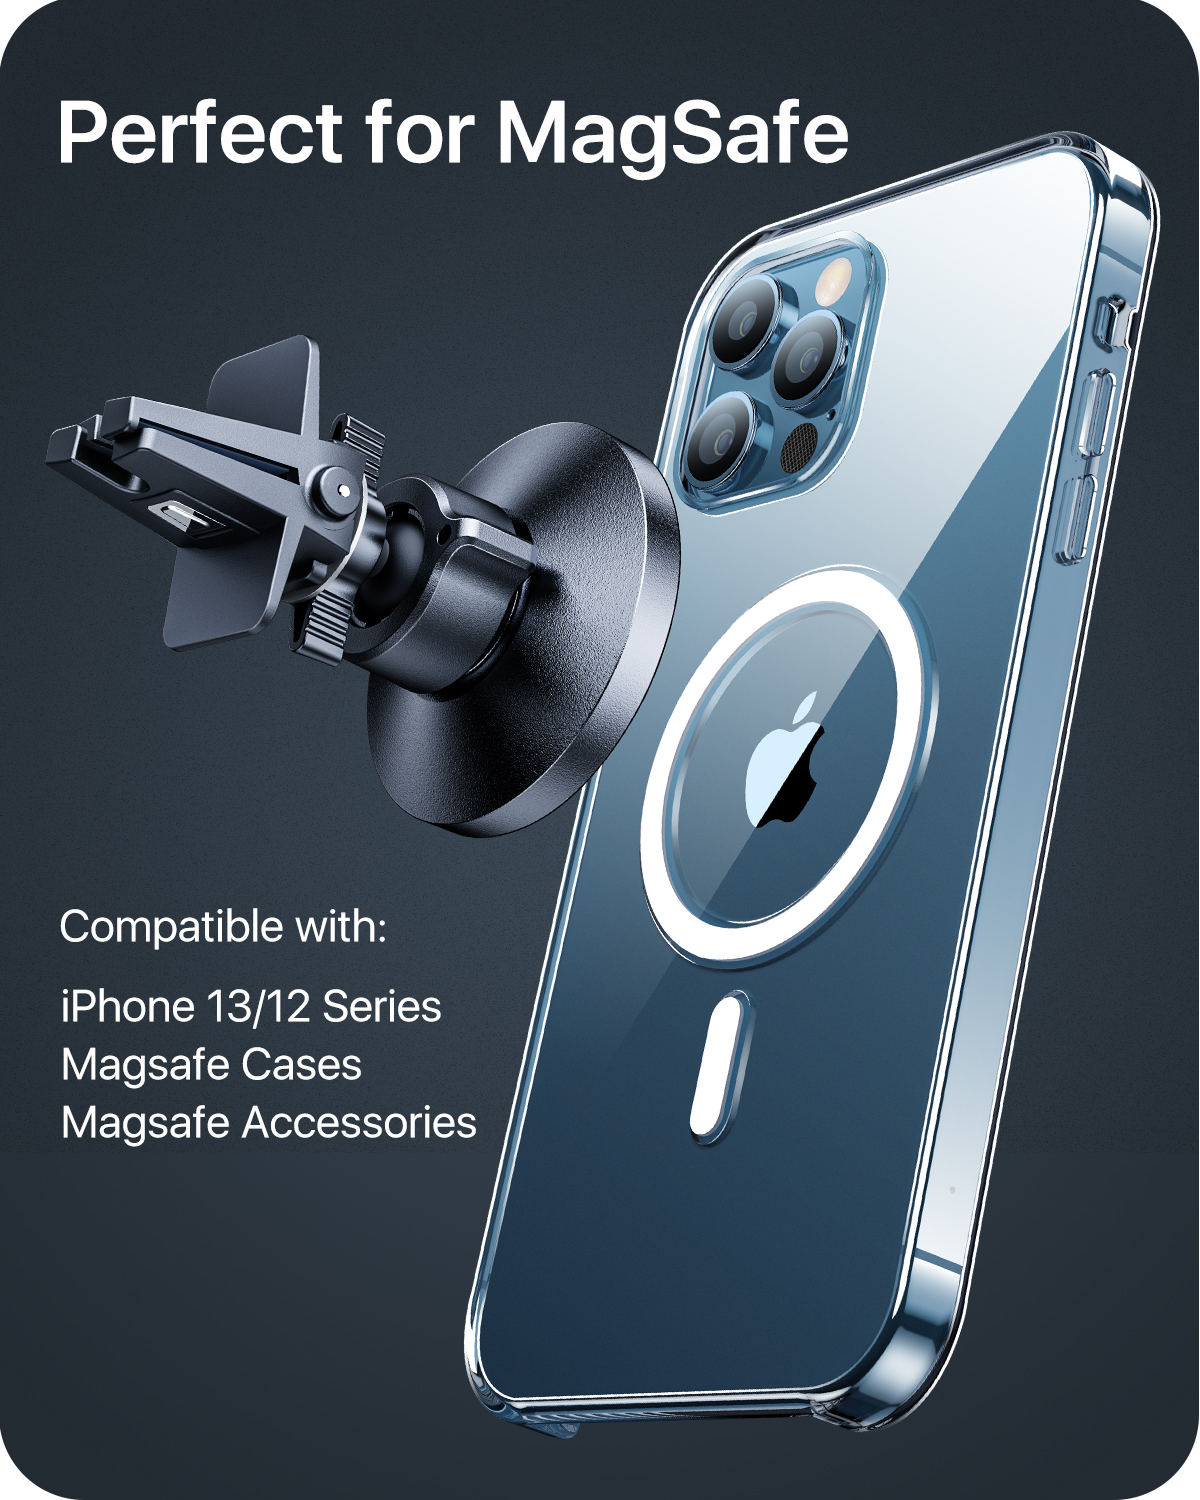 MagSafe Phone Tripod - Free Your Hands, Enjoy Your Life